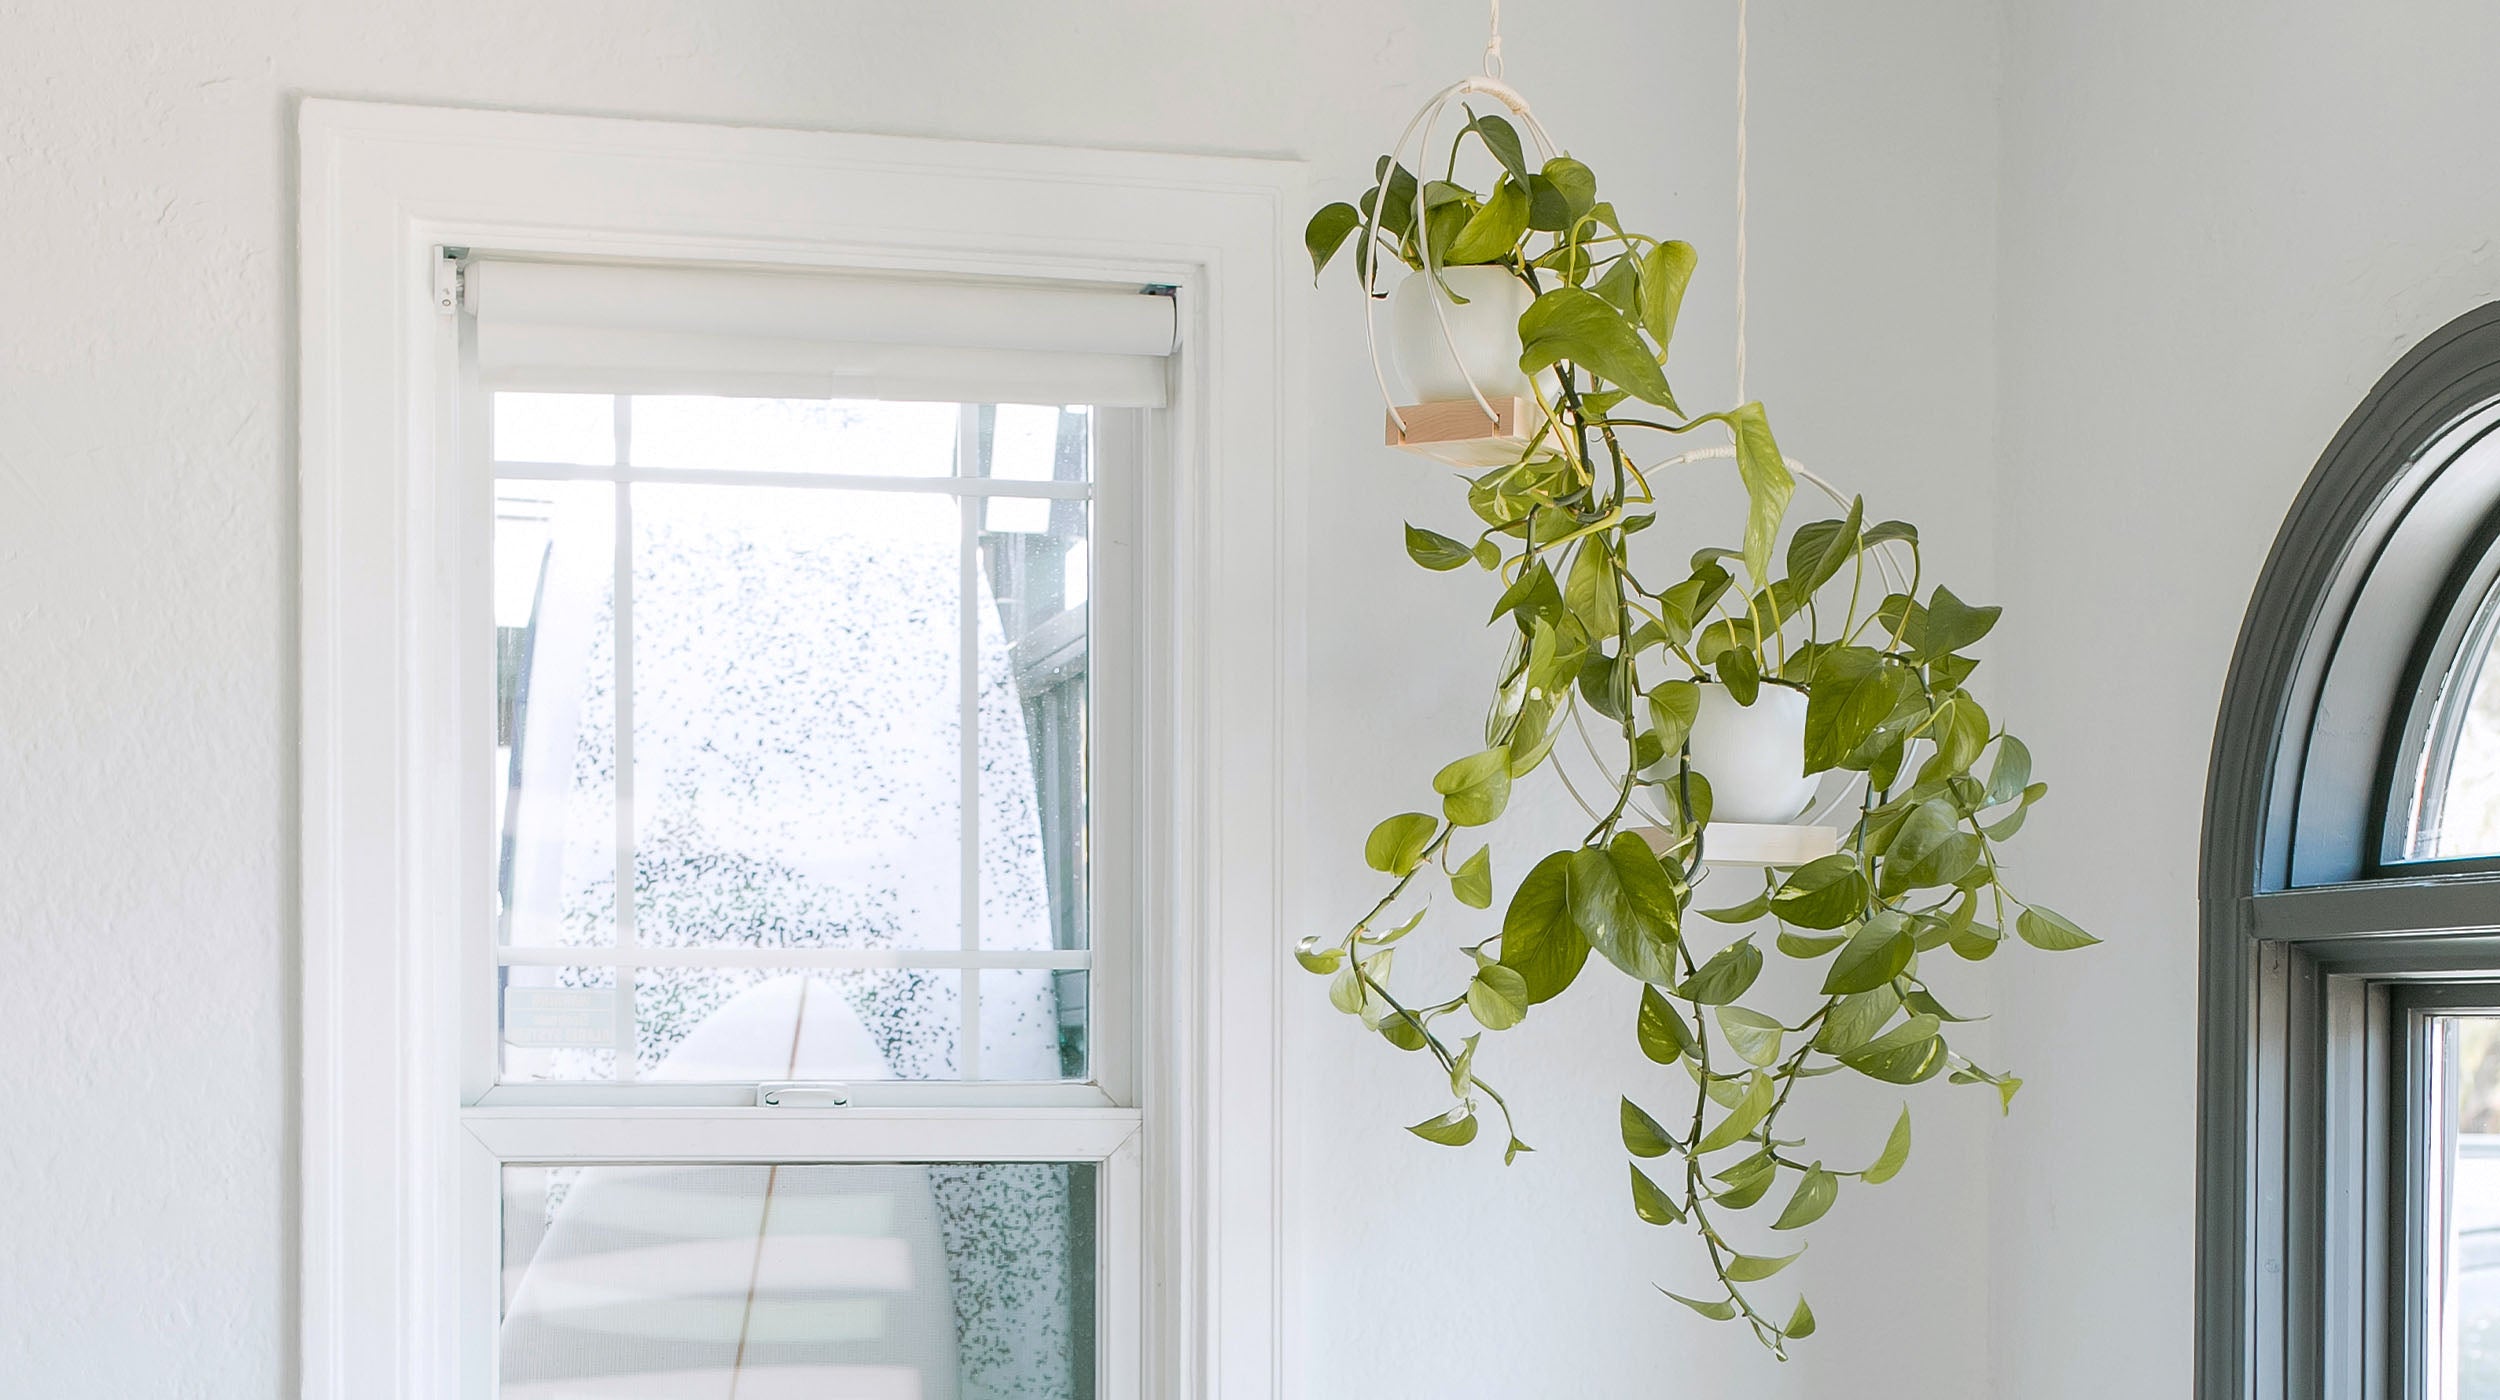 braid and wood hanging planters in white suspended from ceiling with pothos houseplant